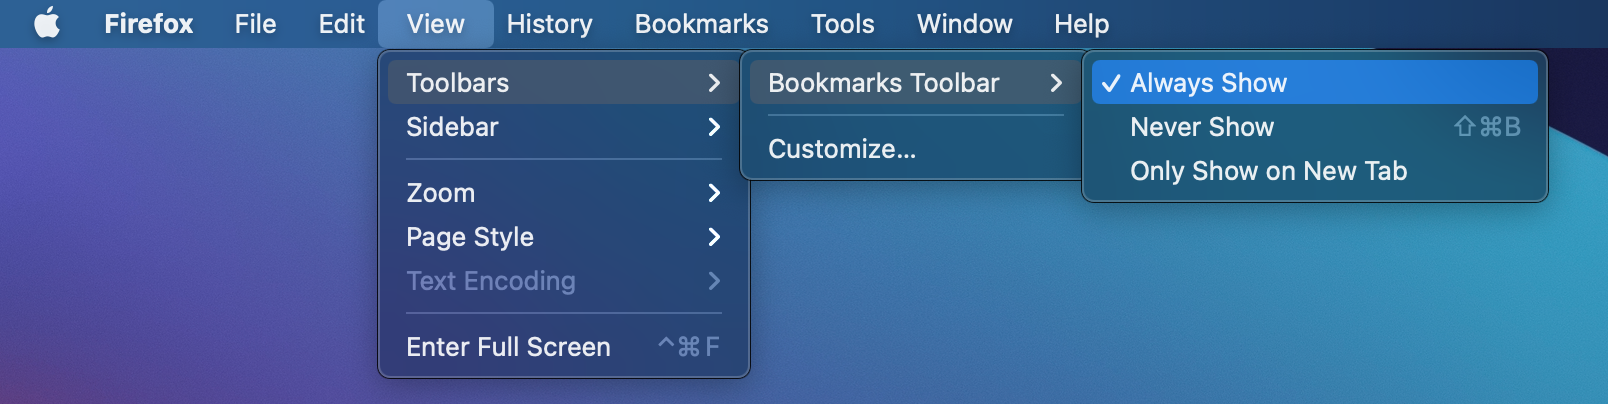 Firefox - How to Always Show Bookmarks Toolbar